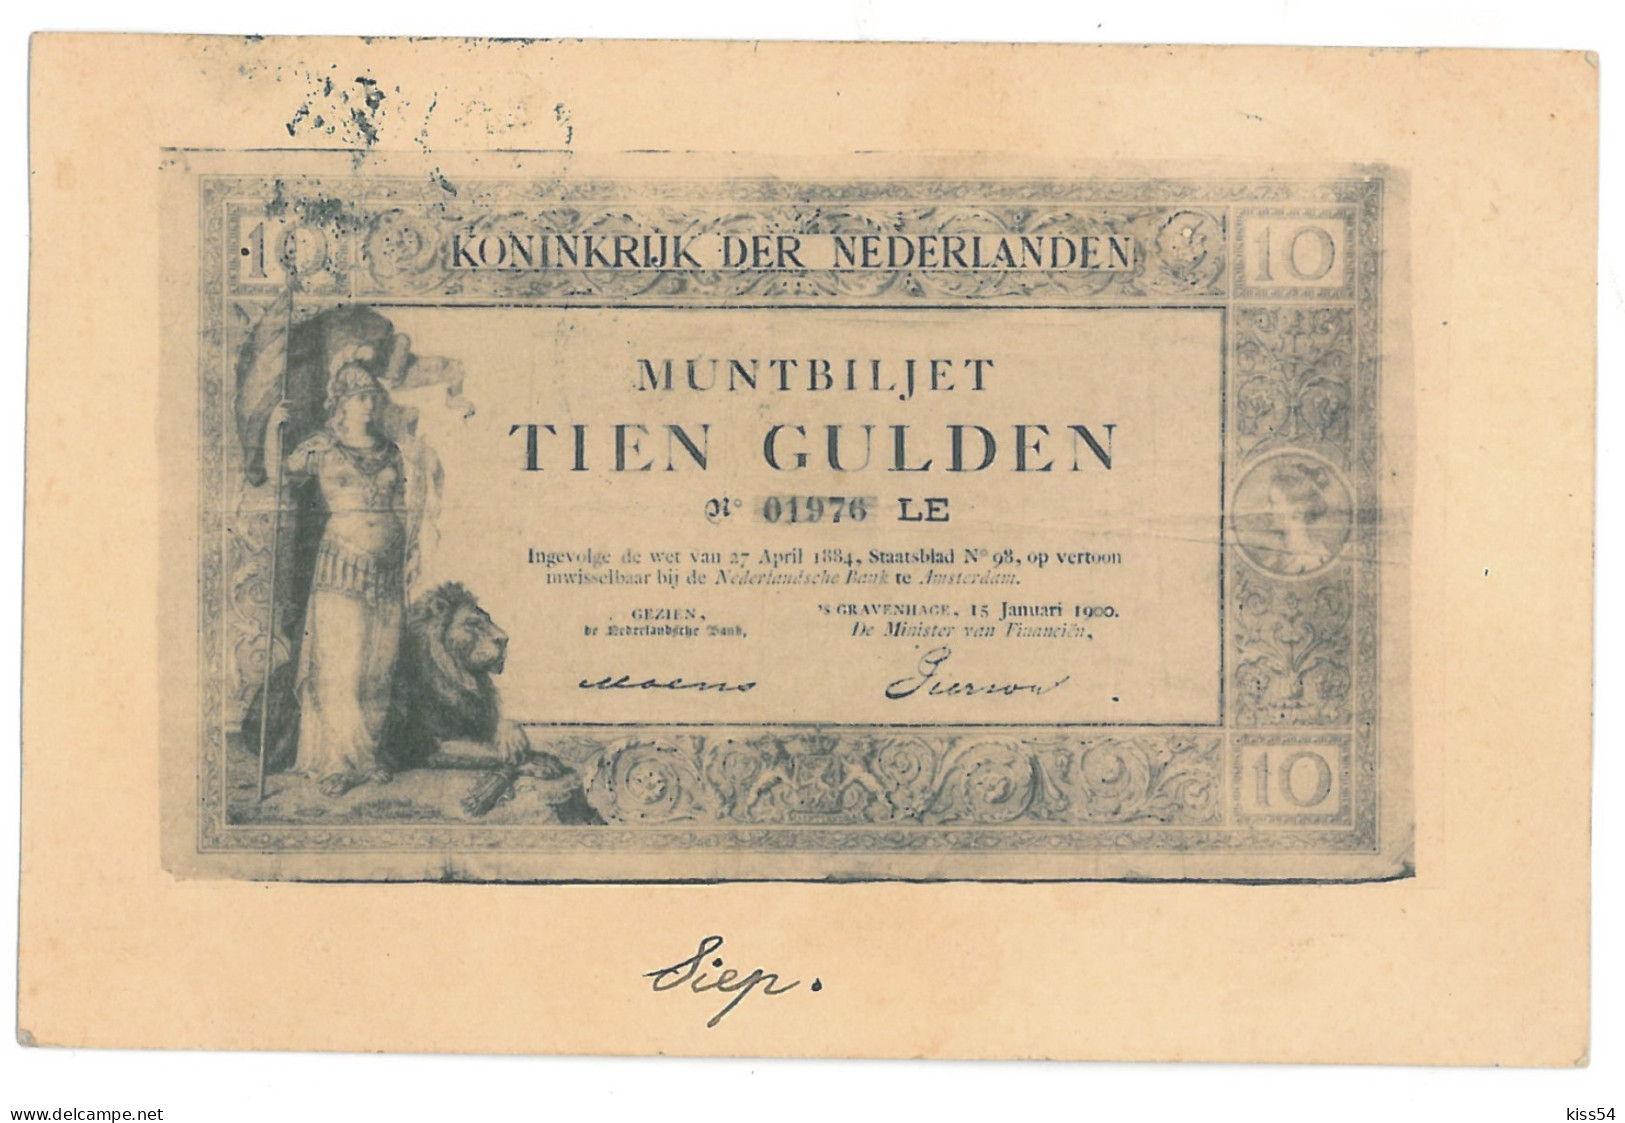 NED 4 - 12210 HOLLAND, Litho, Banknote 10 Gulden - Old Postcard - Used - 1902  - Münzen (Abb.)